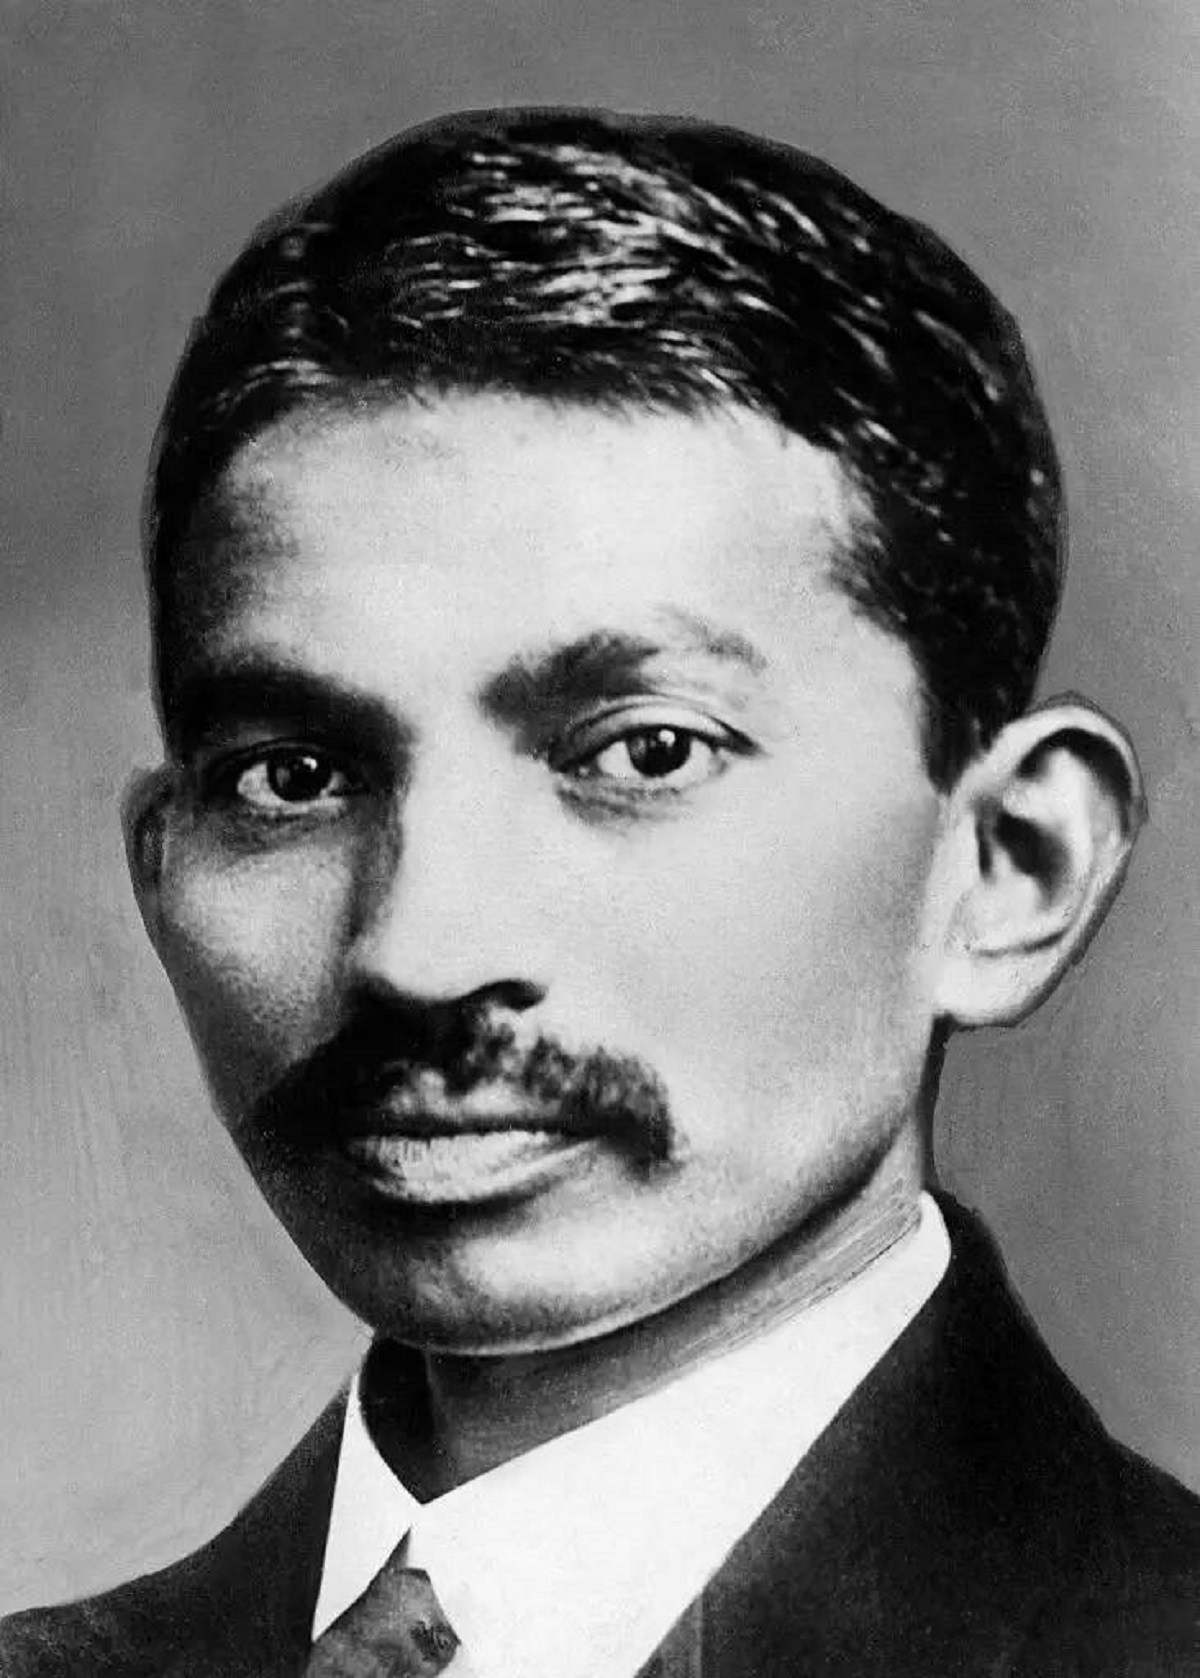 But have you ever seen a picture of him as a young man? Here's Gandhi some time in the late 1800s: